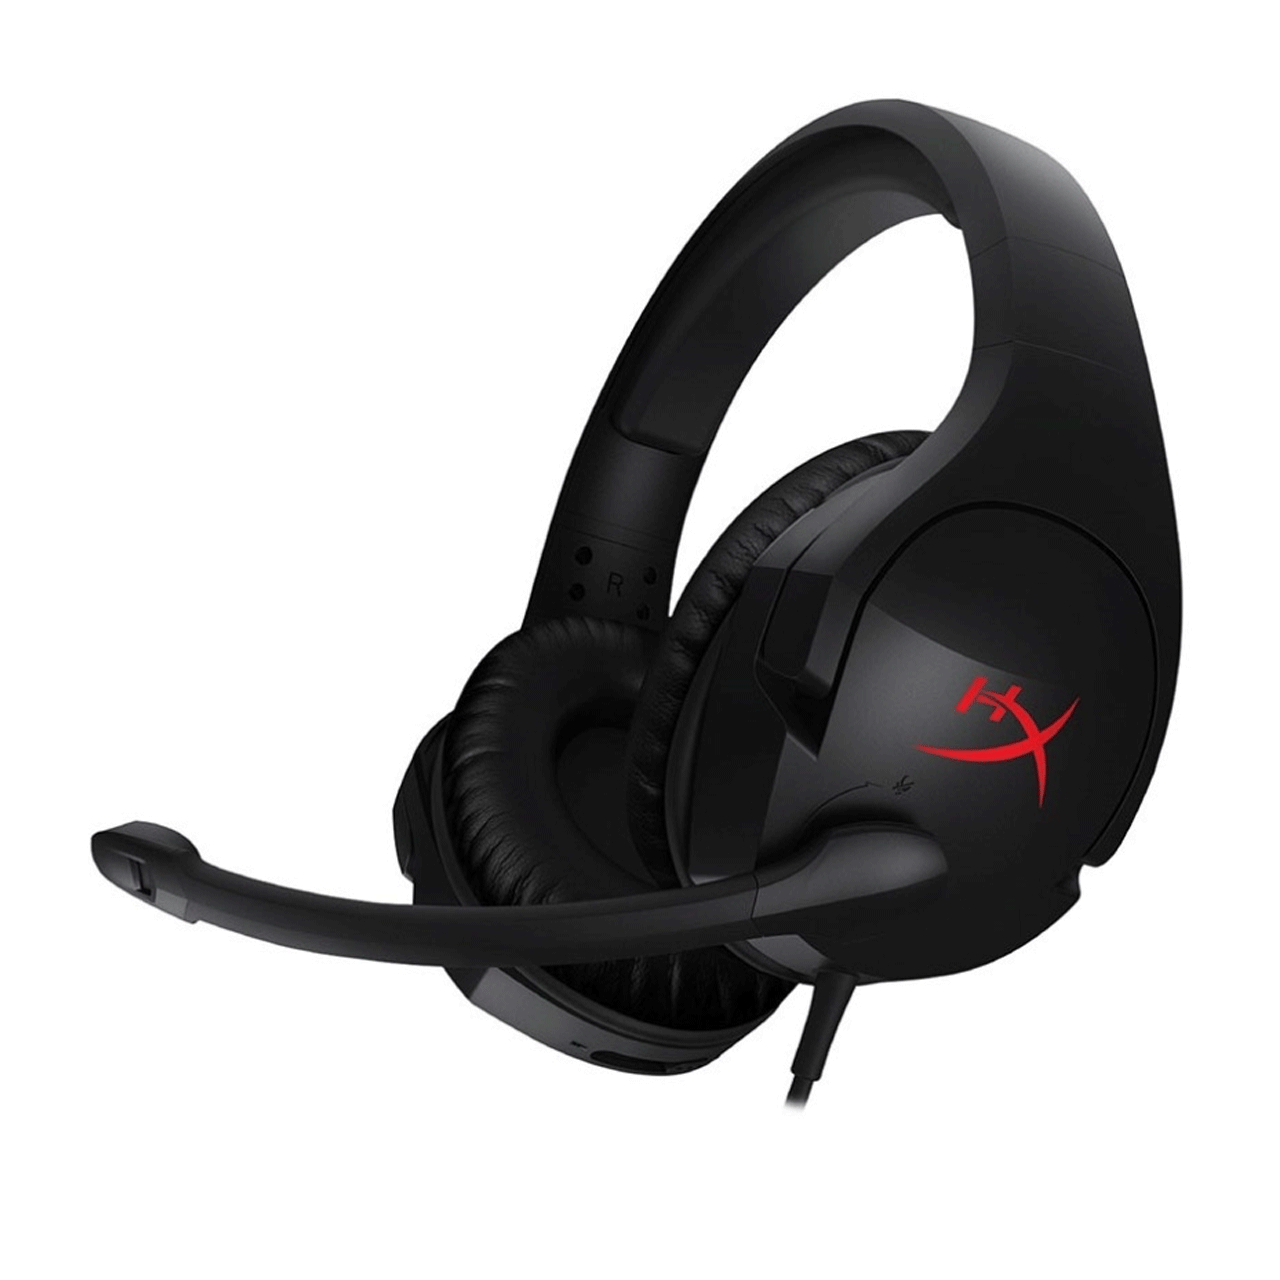 KingSton-HyperX-Cloud-Stinger-Wireless-Gaming-Headset-For-PS4